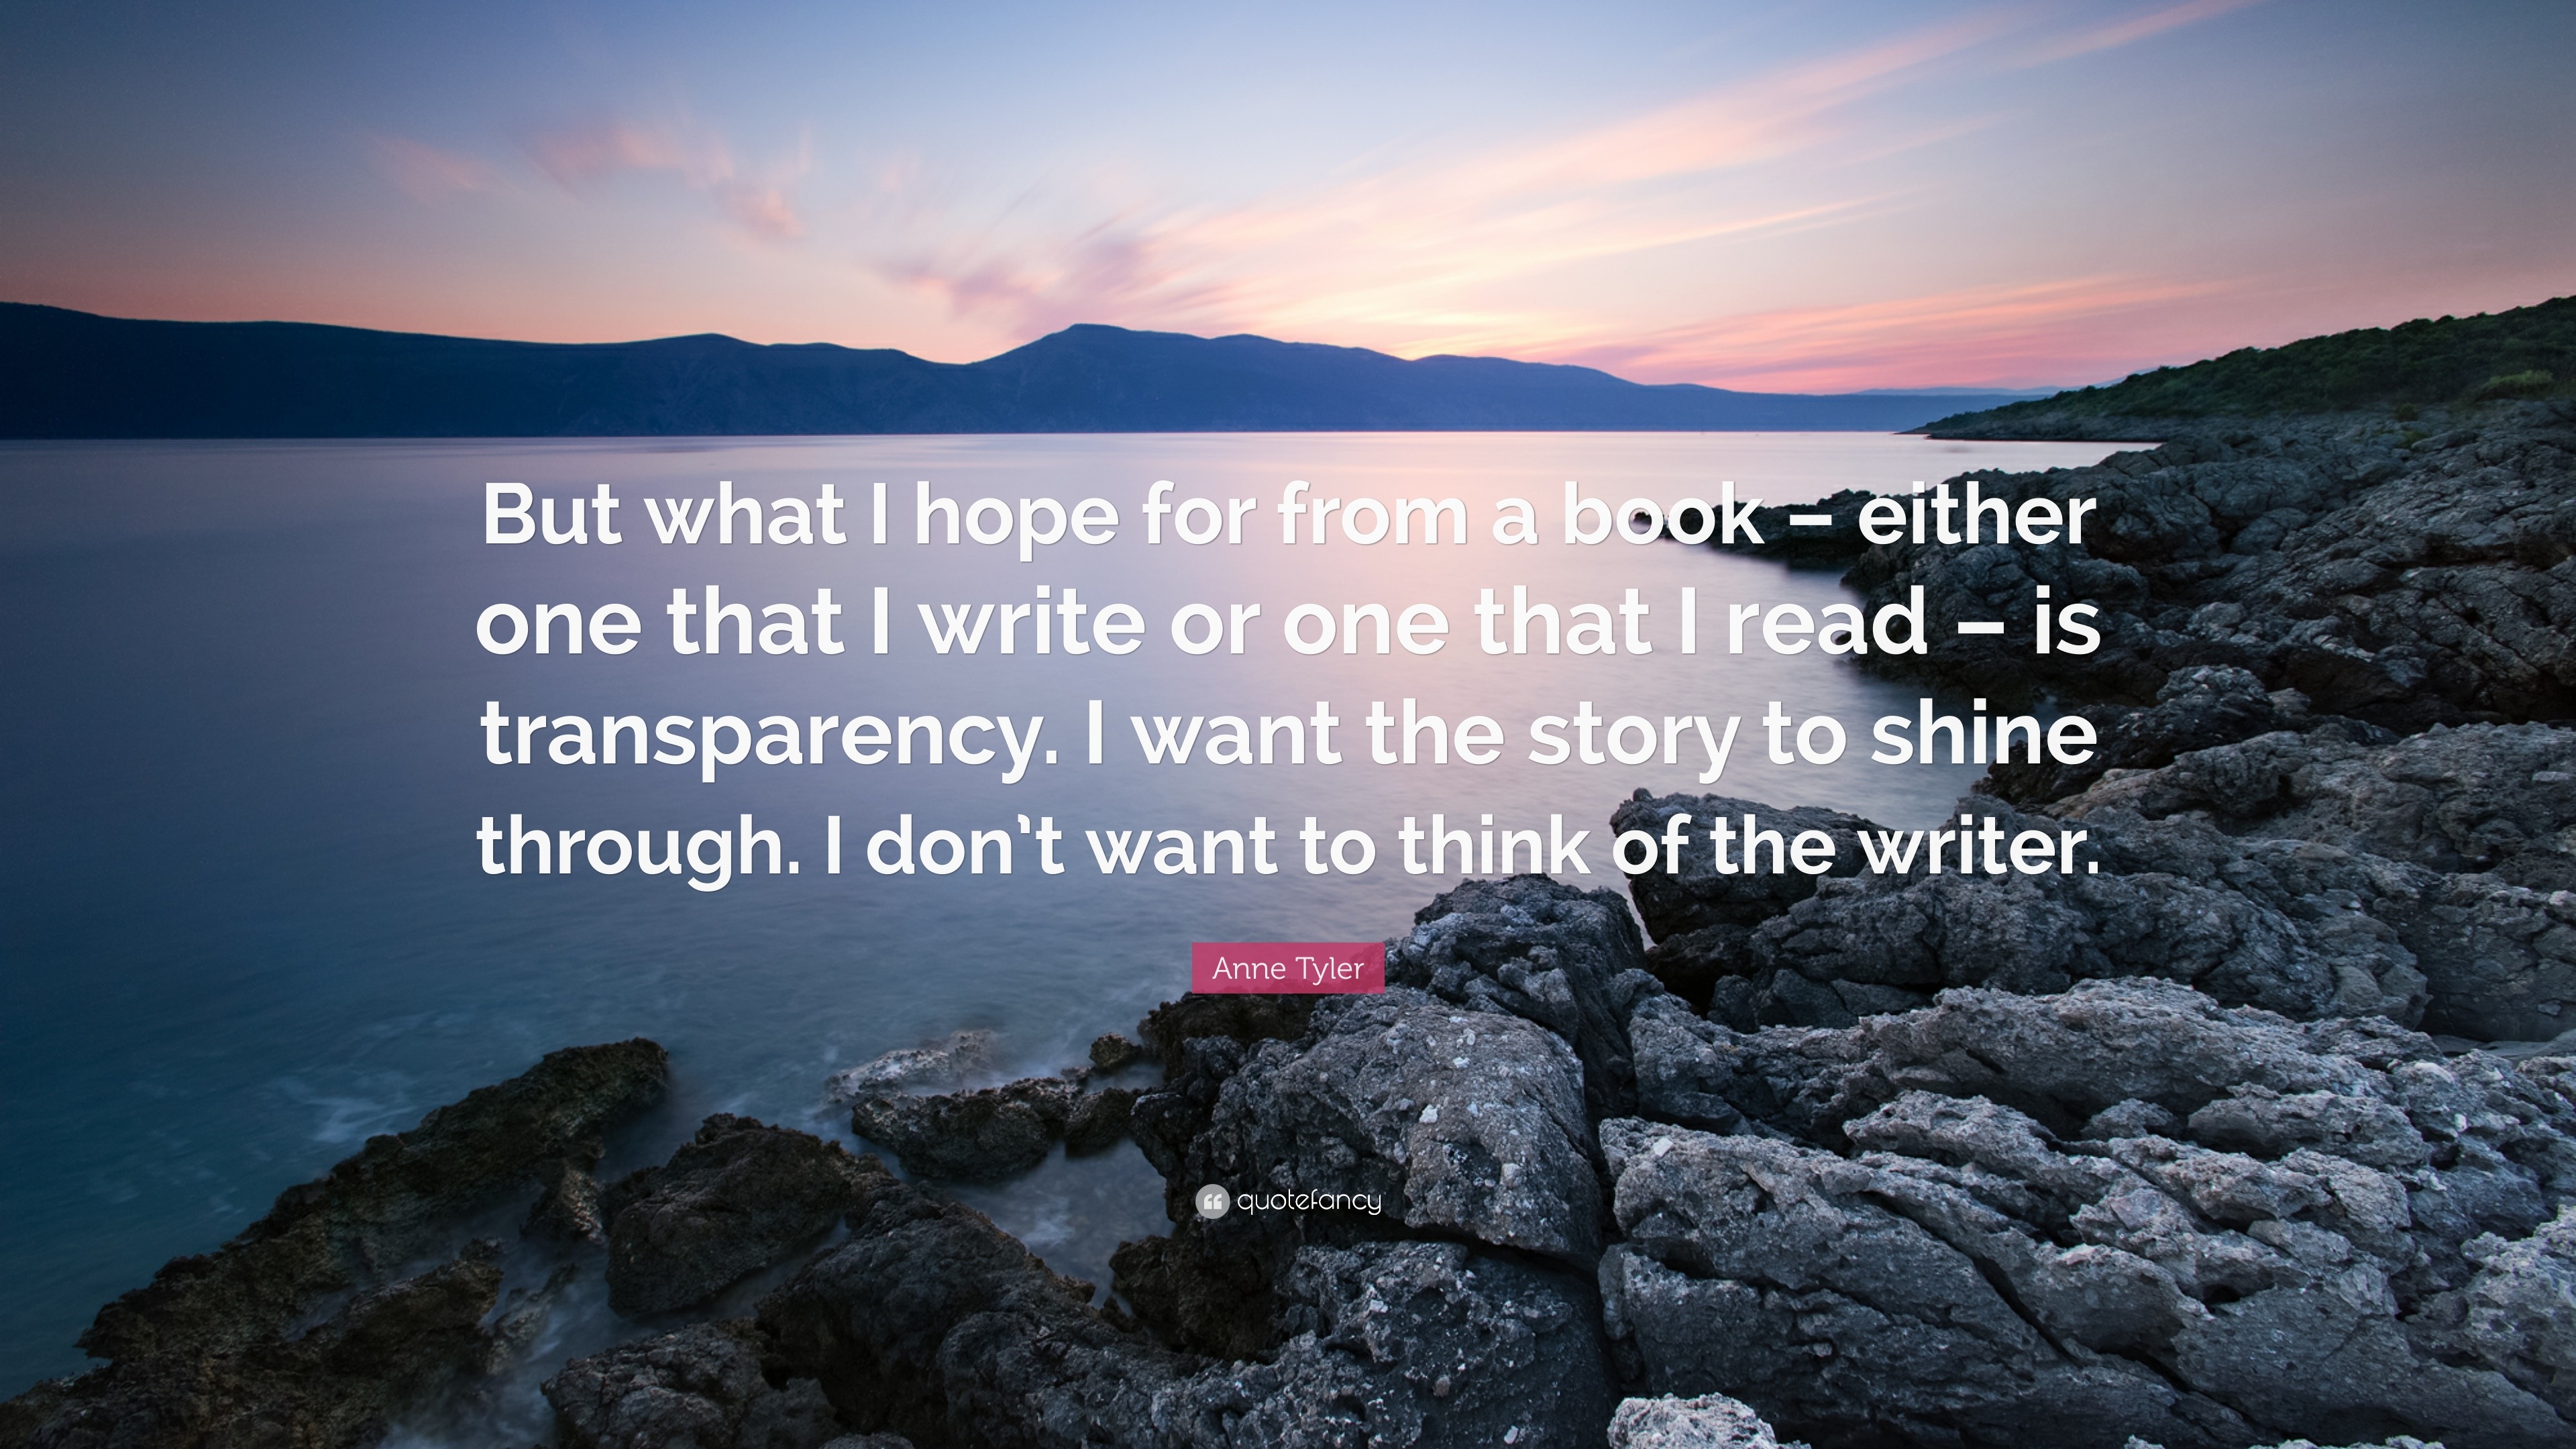 Anne Tyler Quote: “But what I hope for from a book – either one